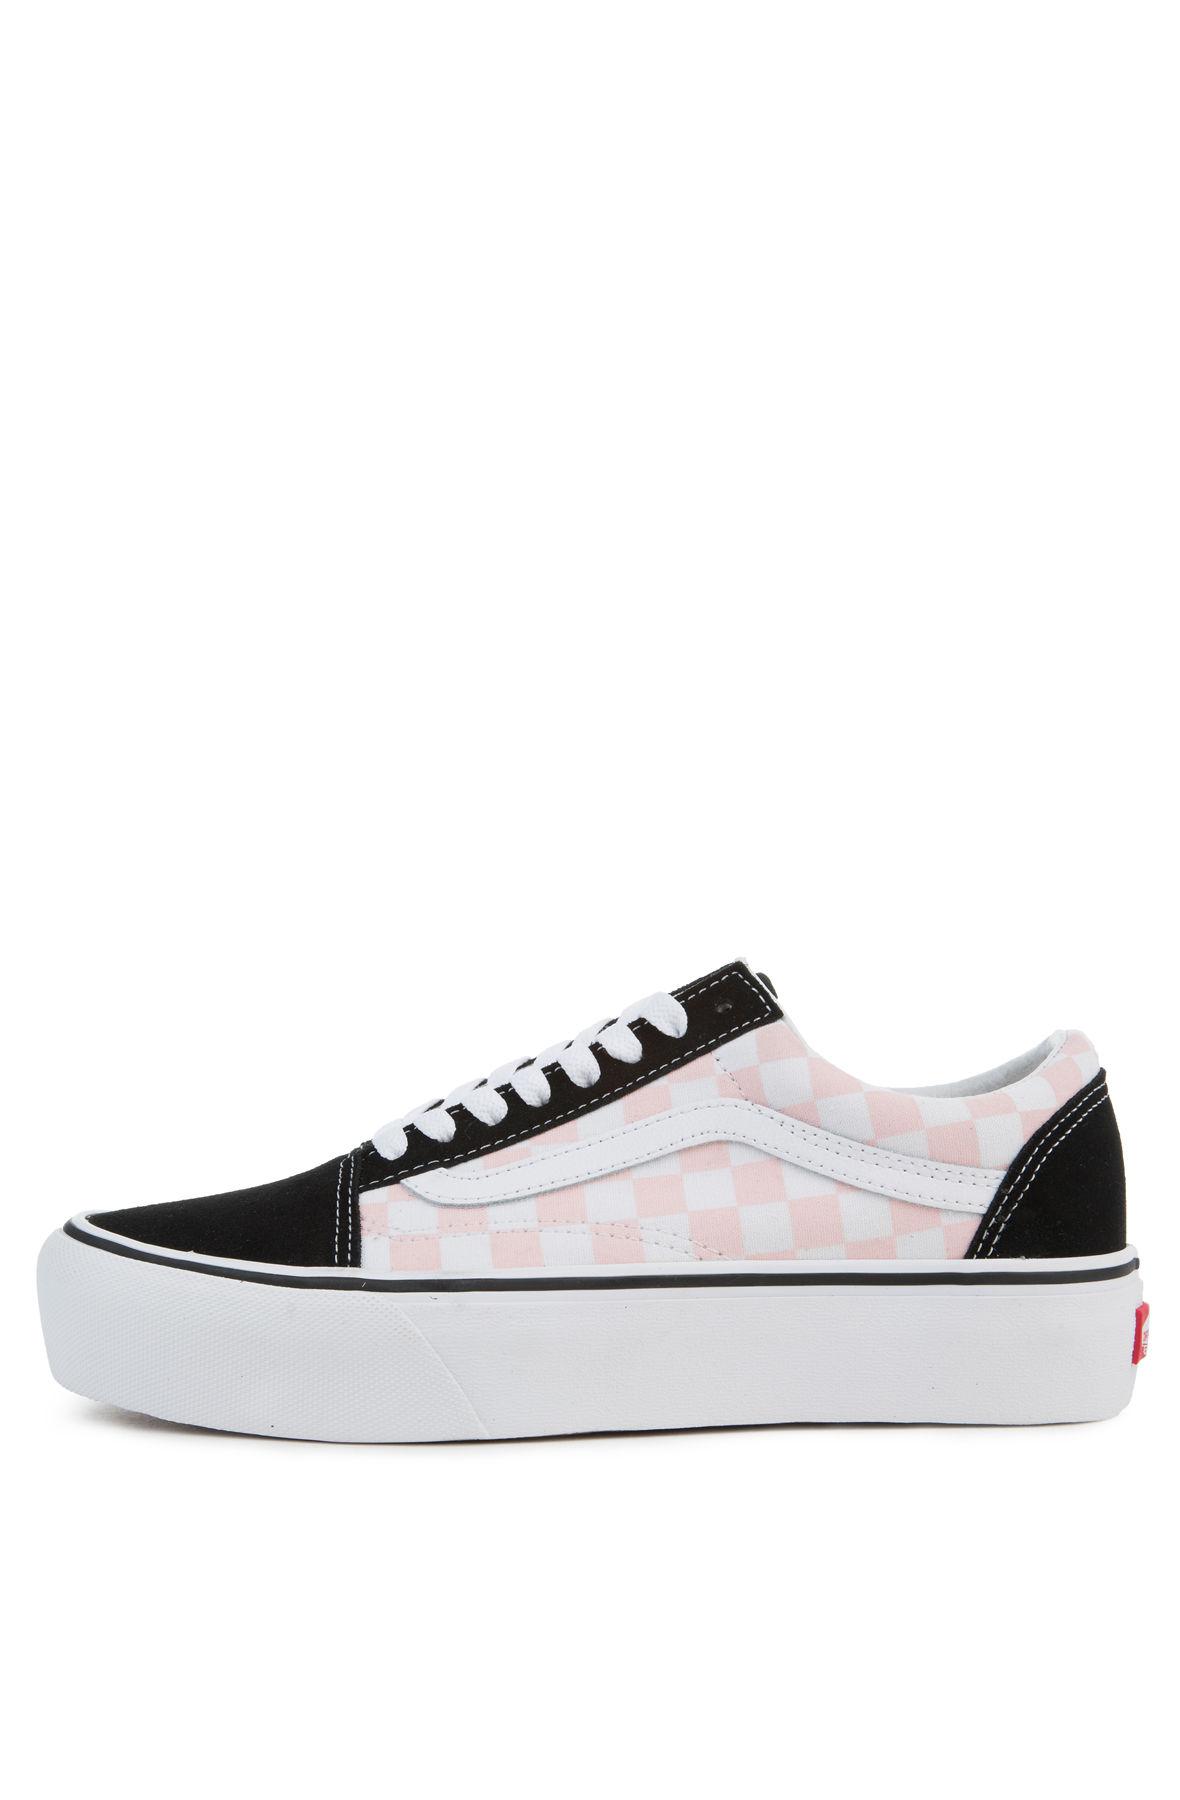 black white and pink checkered vans,www 